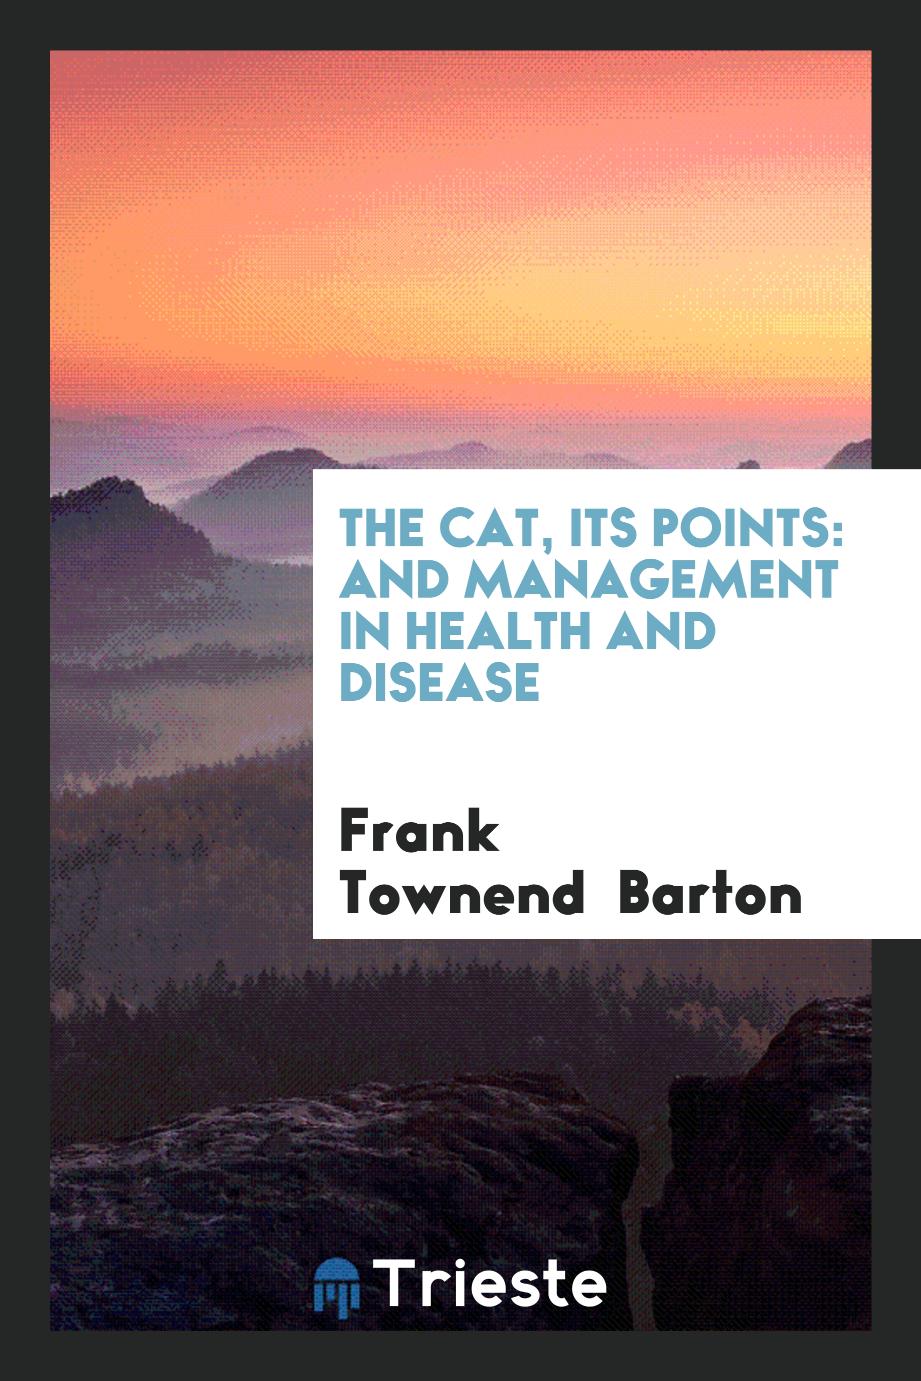 The Cat, Its Points: And Management in Health and Disease